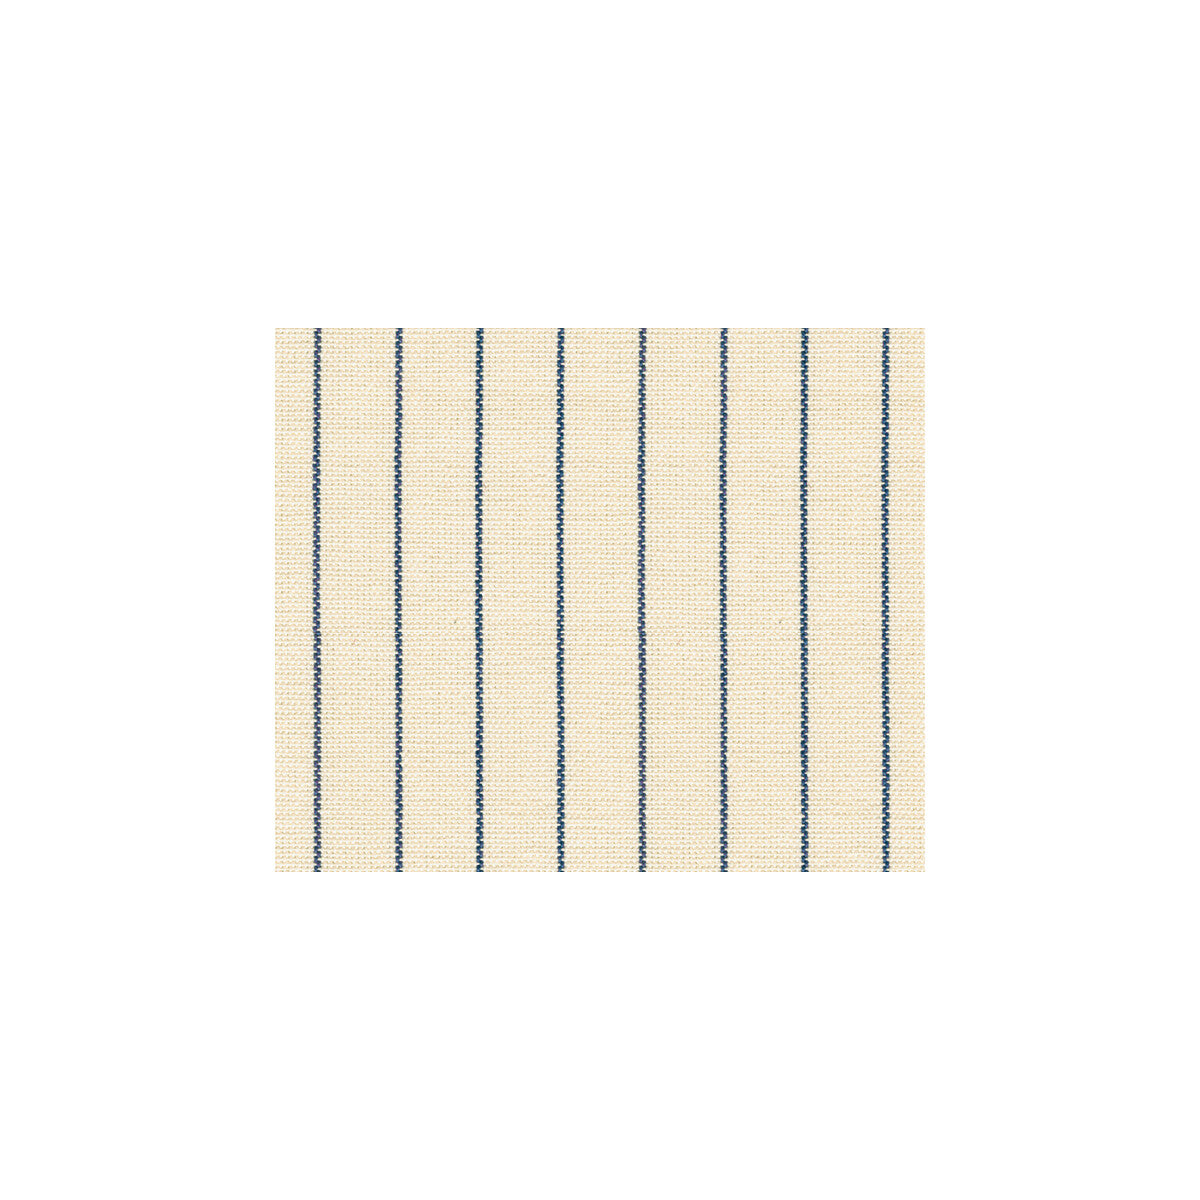 Lodi fabric in sail color - pattern 30814.15.0 - by Kravet Basics in the Thom Filicia collection